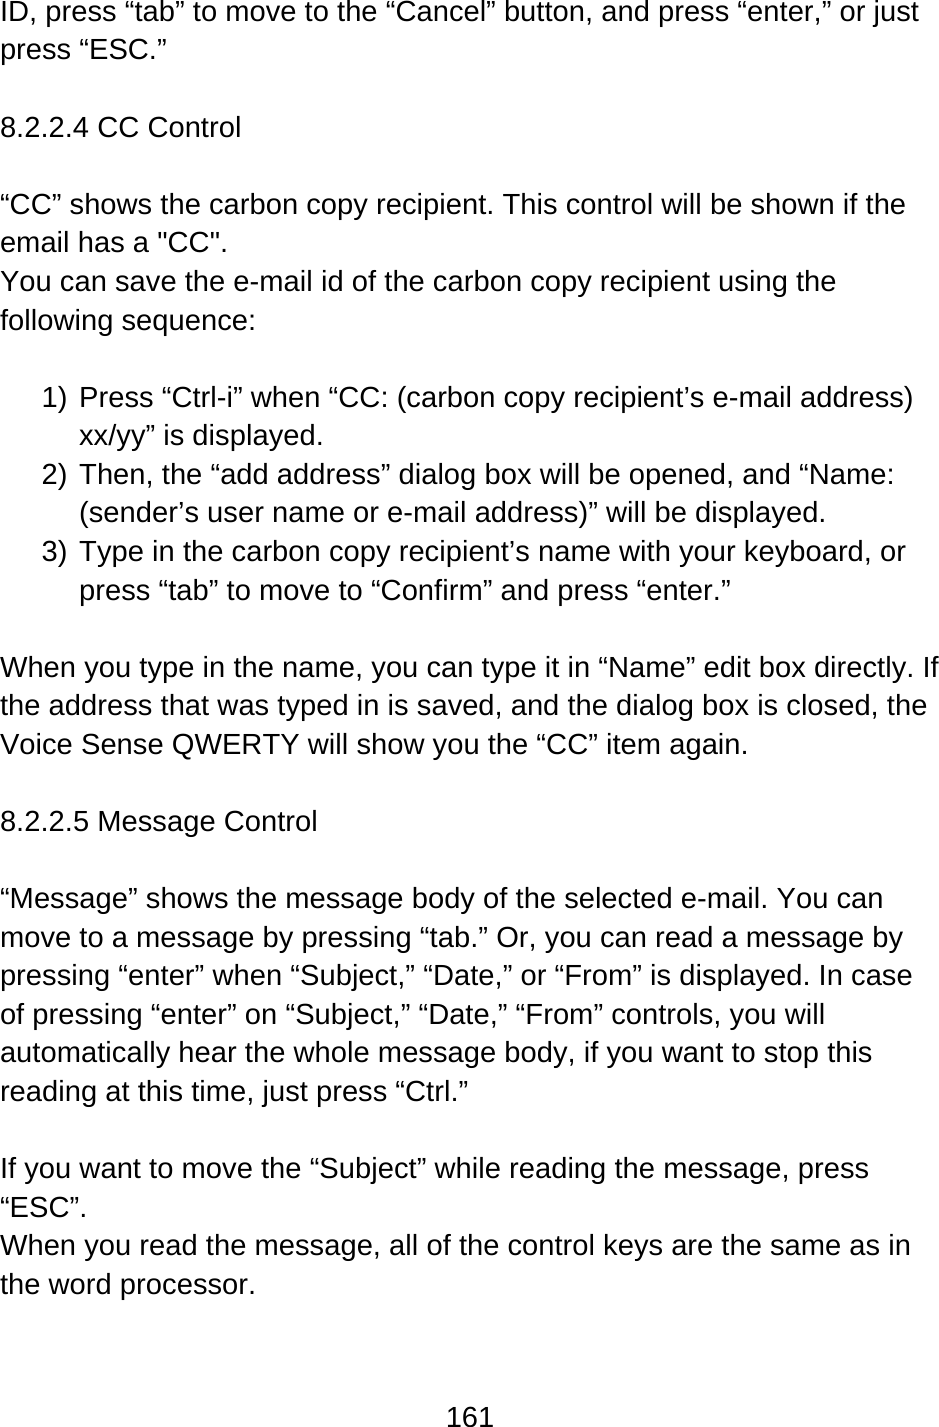 161  ID, press “tab” to move to the “Cancel” button, and press “enter,” or just press “ESC.”  8.2.2.4 CC Control  “CC” shows the carbon copy recipient. This control will be shown if the email has a &quot;CC&quot;. You can save the e-mail id of the carbon copy recipient using the following sequence:  1) Press “Ctrl-i” when “CC: (carbon copy recipient’s e-mail address) xx/yy” is displayed. 2) Then, the “add address” dialog box will be opened, and “Name: (sender’s user name or e-mail address)” will be displayed. 3) Type in the carbon copy recipient’s name with your keyboard, or press “tab” to move to “Confirm” and press “enter.”  When you type in the name, you can type it in “Name” edit box directly. If the address that was typed in is saved, and the dialog box is closed, the Voice Sense QWERTY will show you the “CC” item again.  8.2.2.5 Message Control  “Message” shows the message body of the selected e-mail. You can move to a message by pressing “tab.” Or, you can read a message by pressing “enter” when “Subject,” “Date,” or “From” is displayed. In case of pressing “enter” on “Subject,” “Date,” “From” controls, you will automatically hear the whole message body, if you want to stop this reading at this time, just press “Ctrl.”  If you want to move the “Subject” while reading the message, press “ESC”. When you read the message, all of the control keys are the same as in the word processor.  